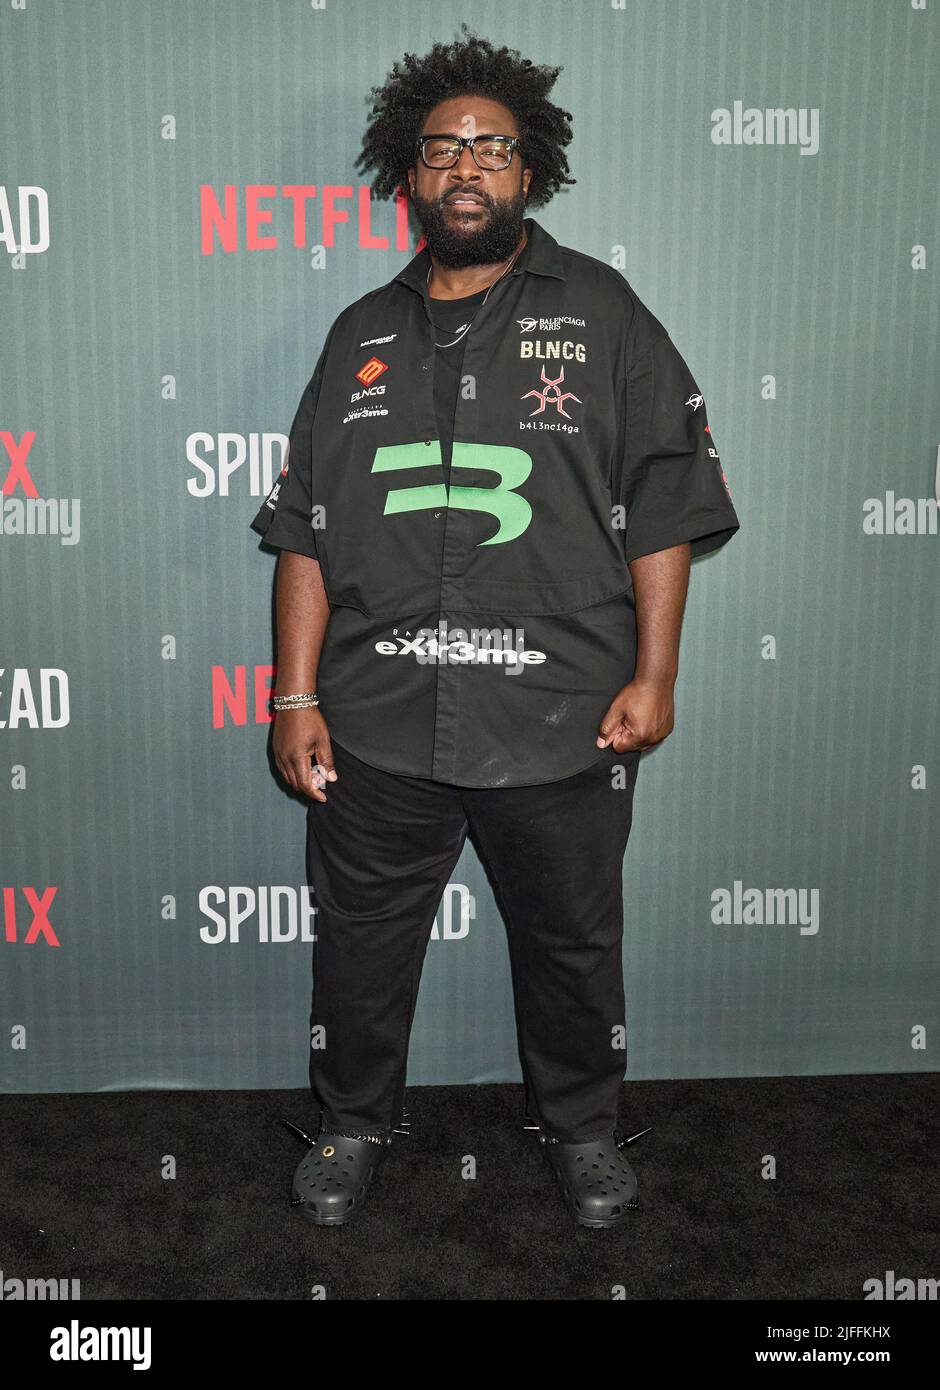 NEW YORK, NY, USA - JUNE 15, 2022: Questlove attends the New York Premiere of Netflix's 'Spiderhead' at the Paris Theater. Stock Photo